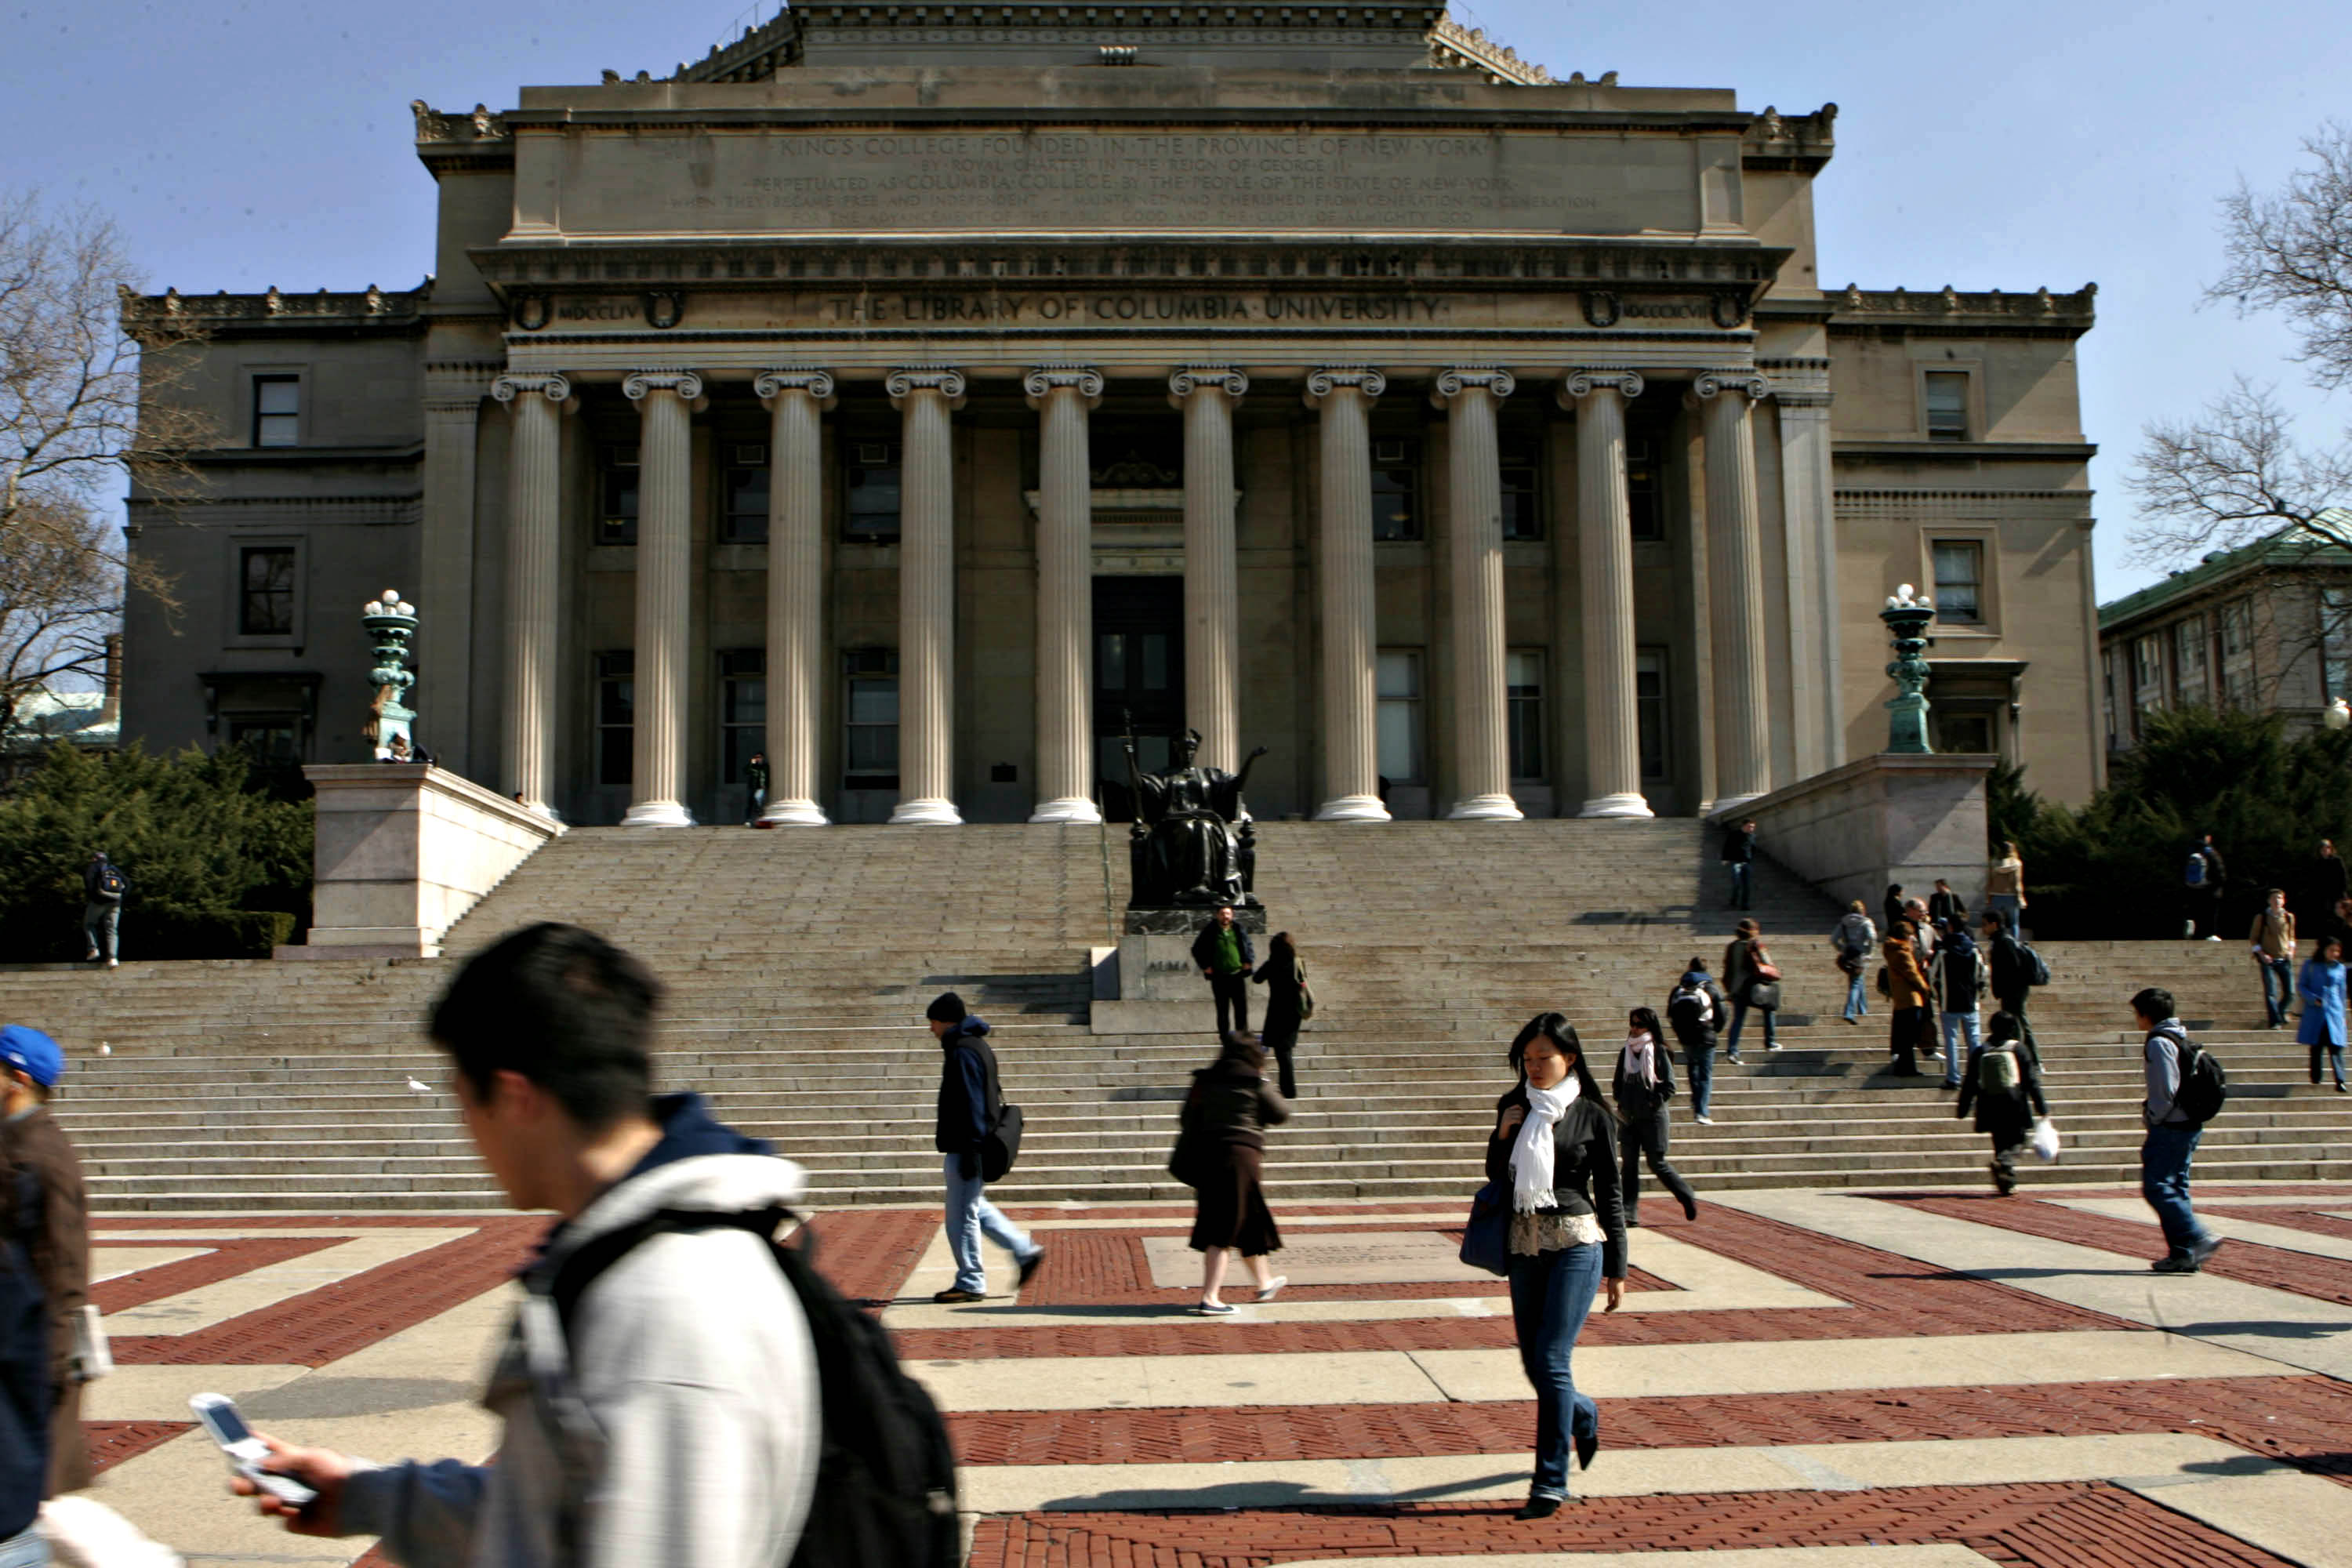 Students walk across the campus of Columbia University in New York City (Daniel Barry—Bloomberg / Getty Images)